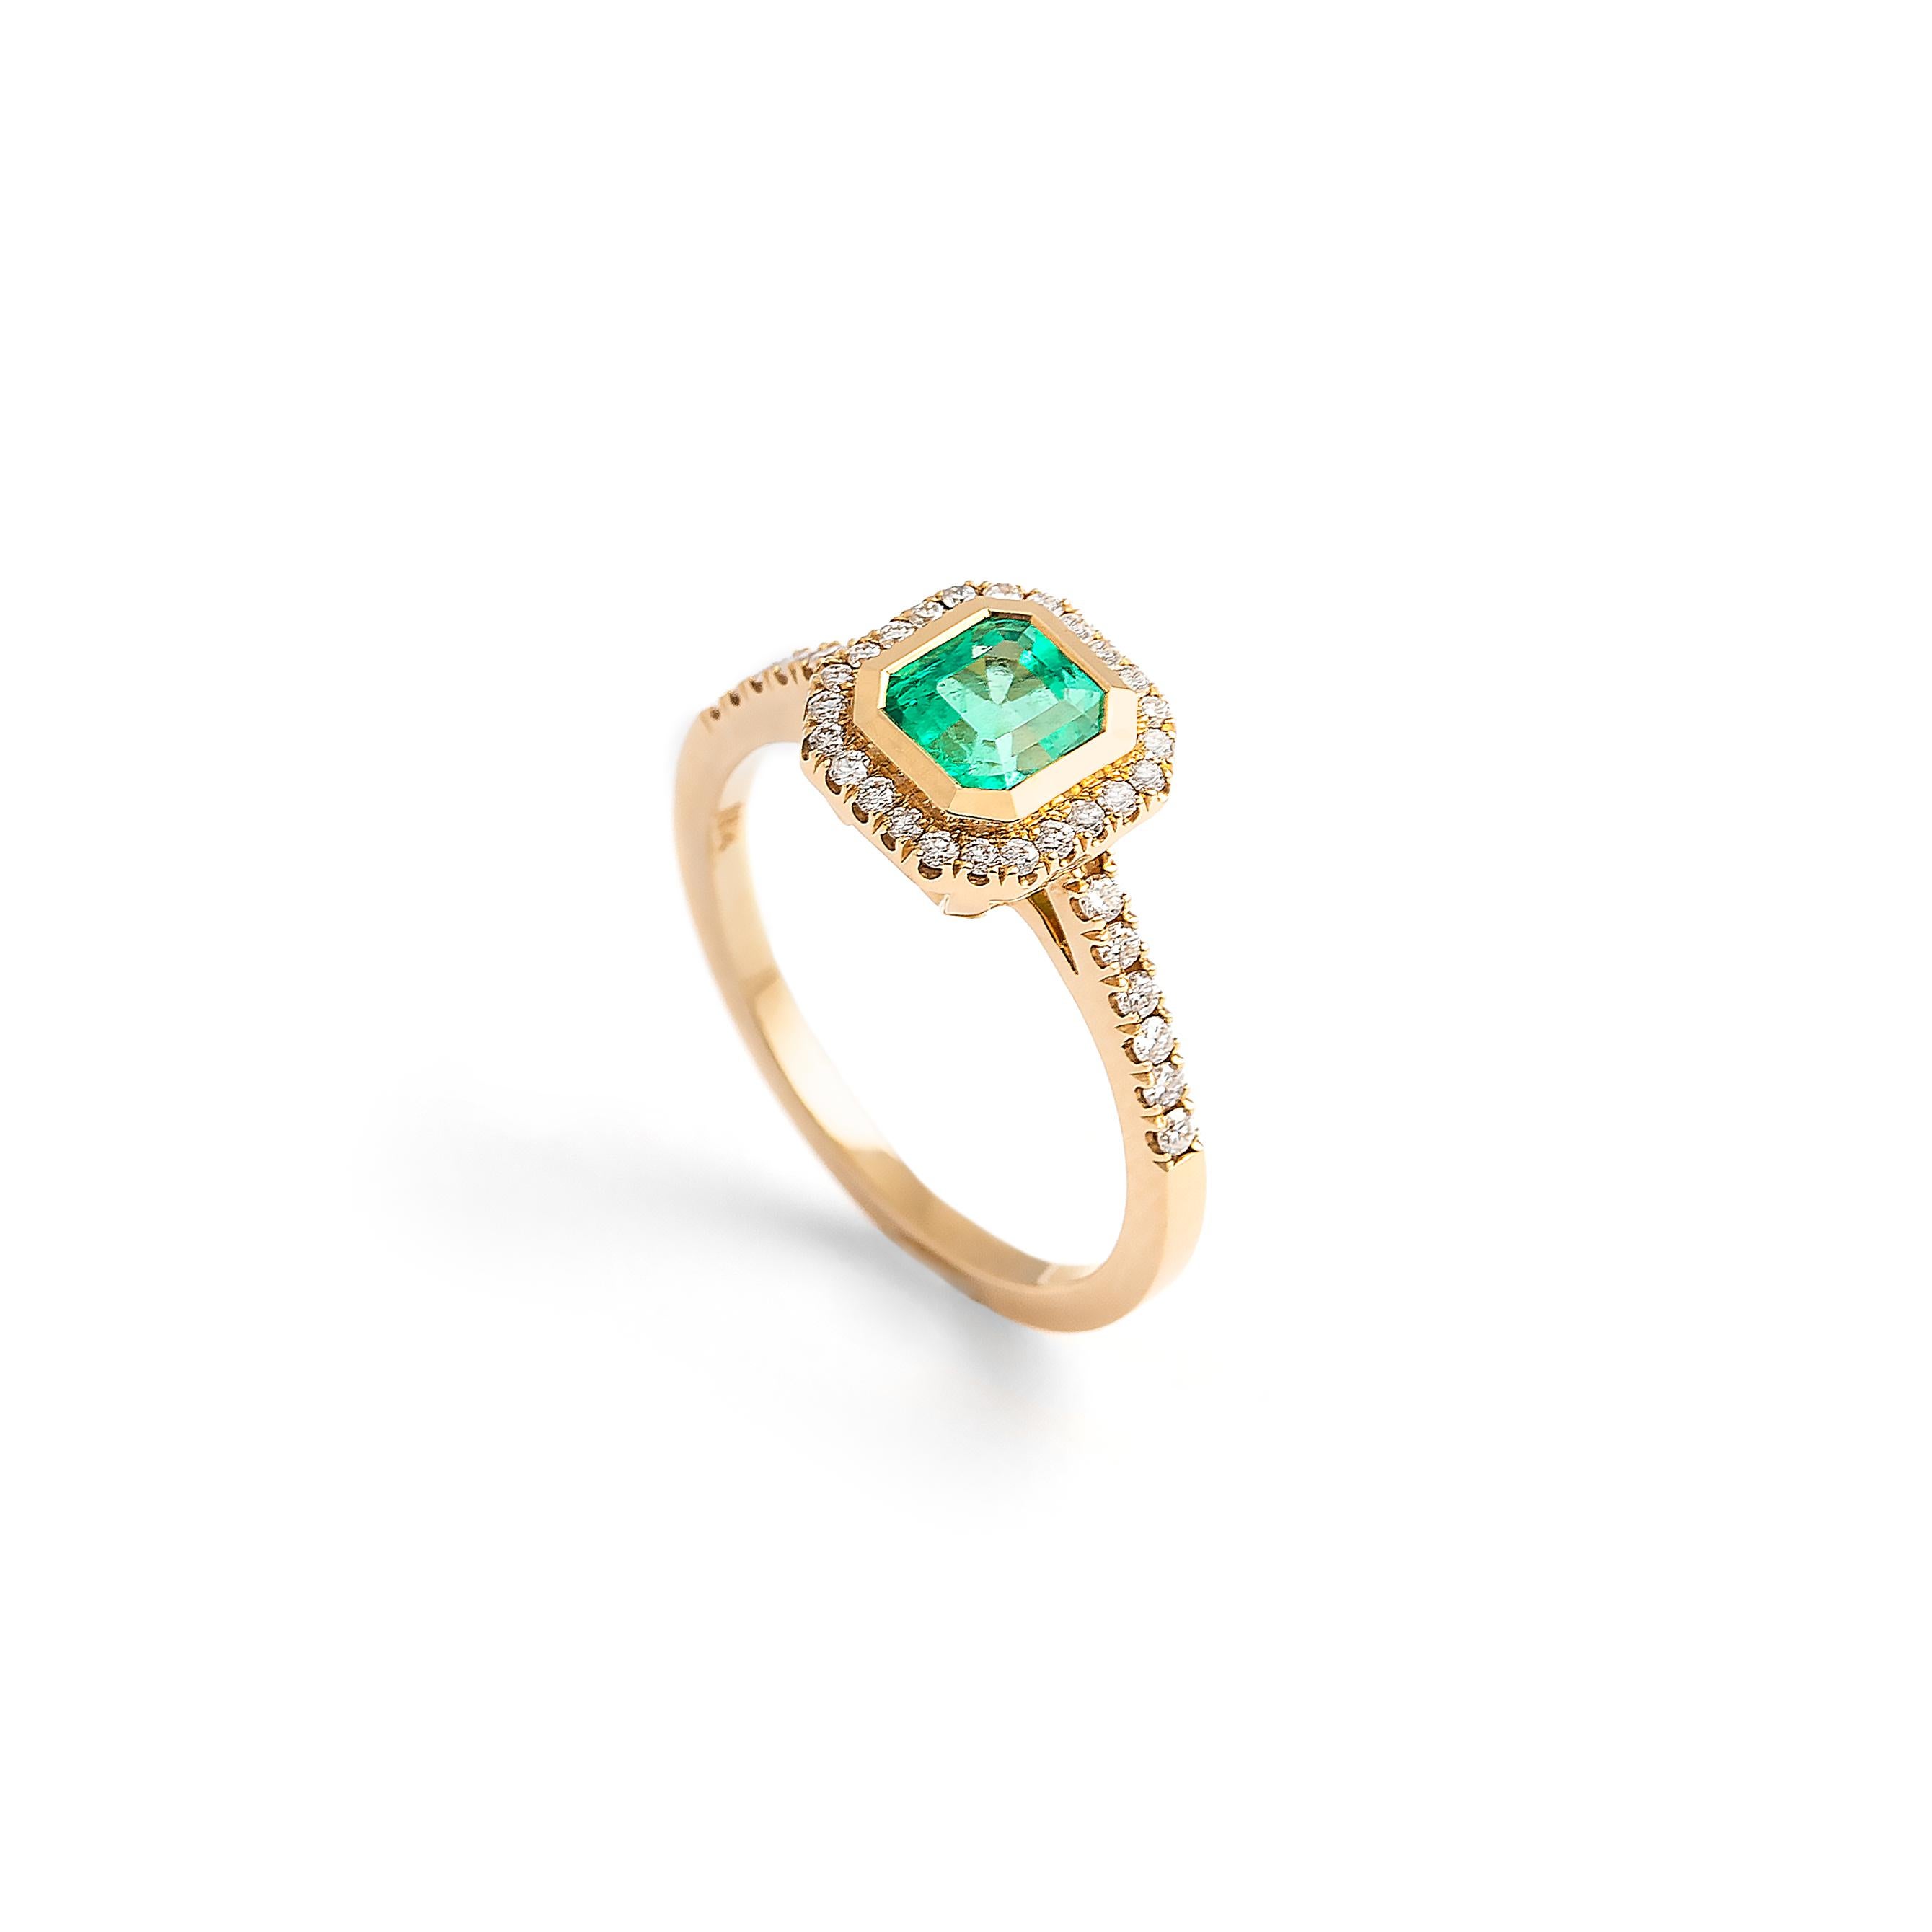 0.80 carat Colombian Emerald ring 18k, mounted on yellow gold, with 36 diamonds.
Weight: 3.49 grams
Size: 51.